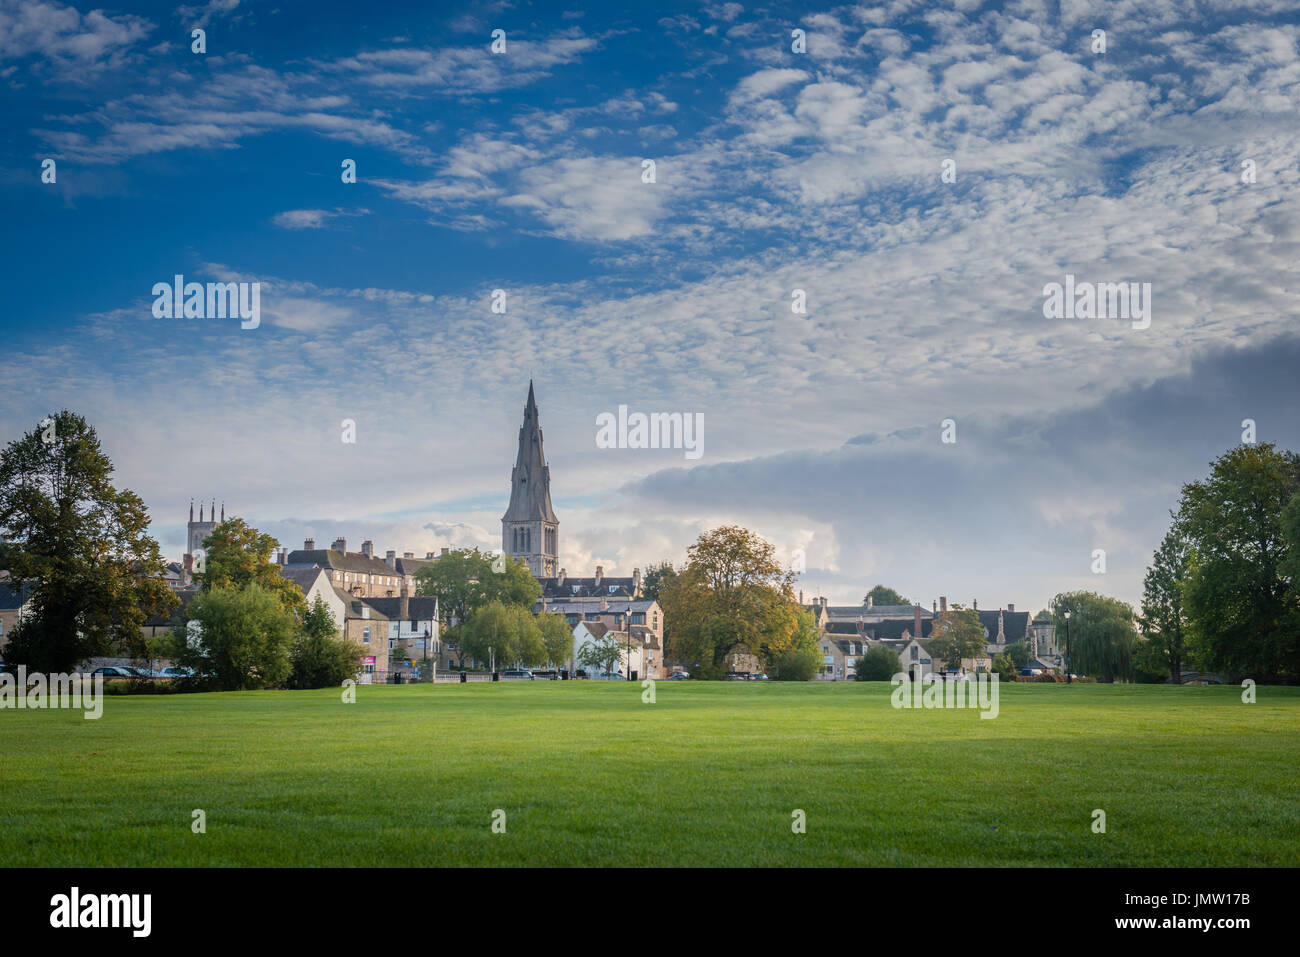 Picturesque views of the historic Lincolnshire town of Stamford taken from the Town Meadows featuring some of it's many church spires. Stock Photo